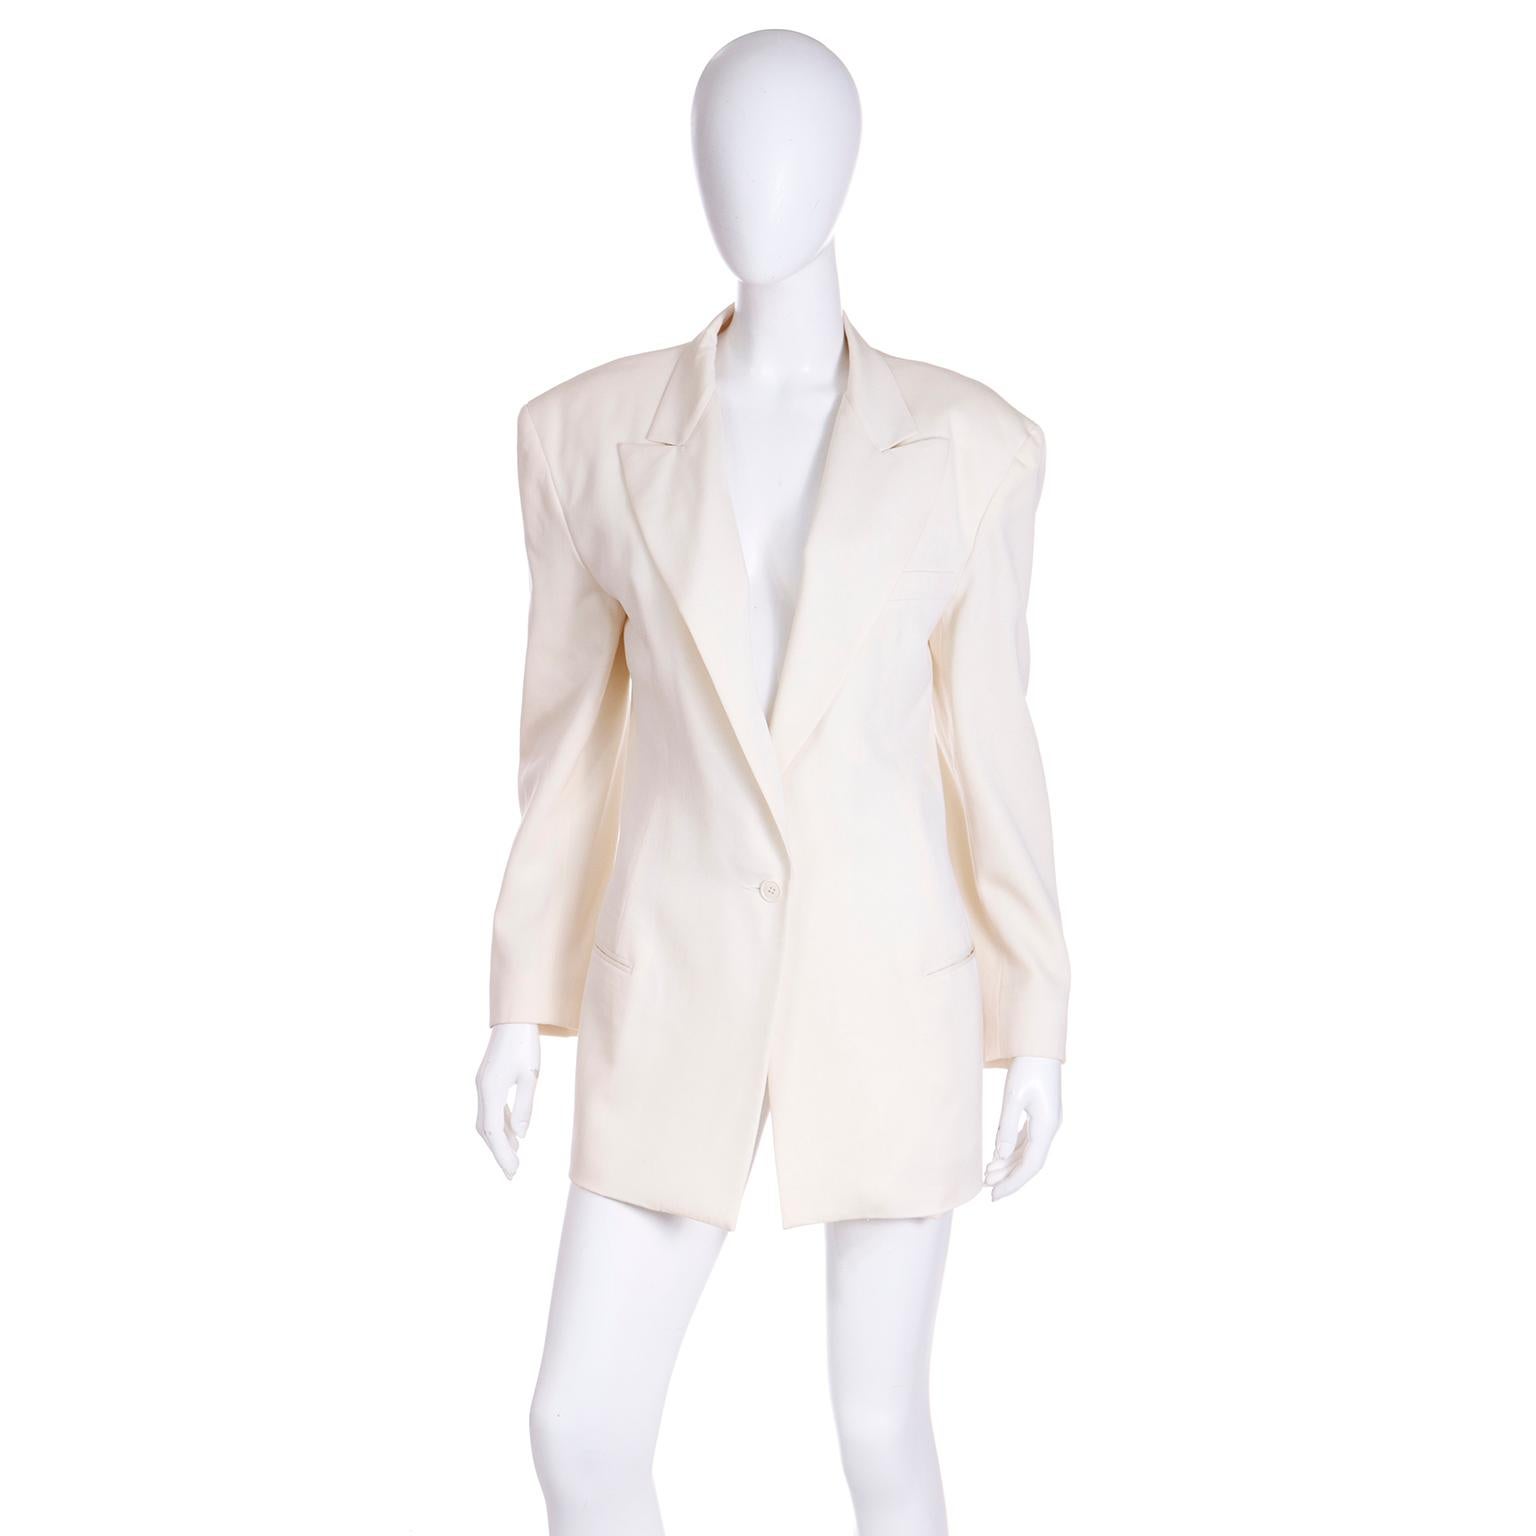 This is a pretty vintage Norma Kamali 1980's OMO lightweight ivory wool, single breasted blazer. We love vintage Norma Kamali pieces and this oversized jacket has peak lapels, a front center button closure, left breast pocket and horizontal slit